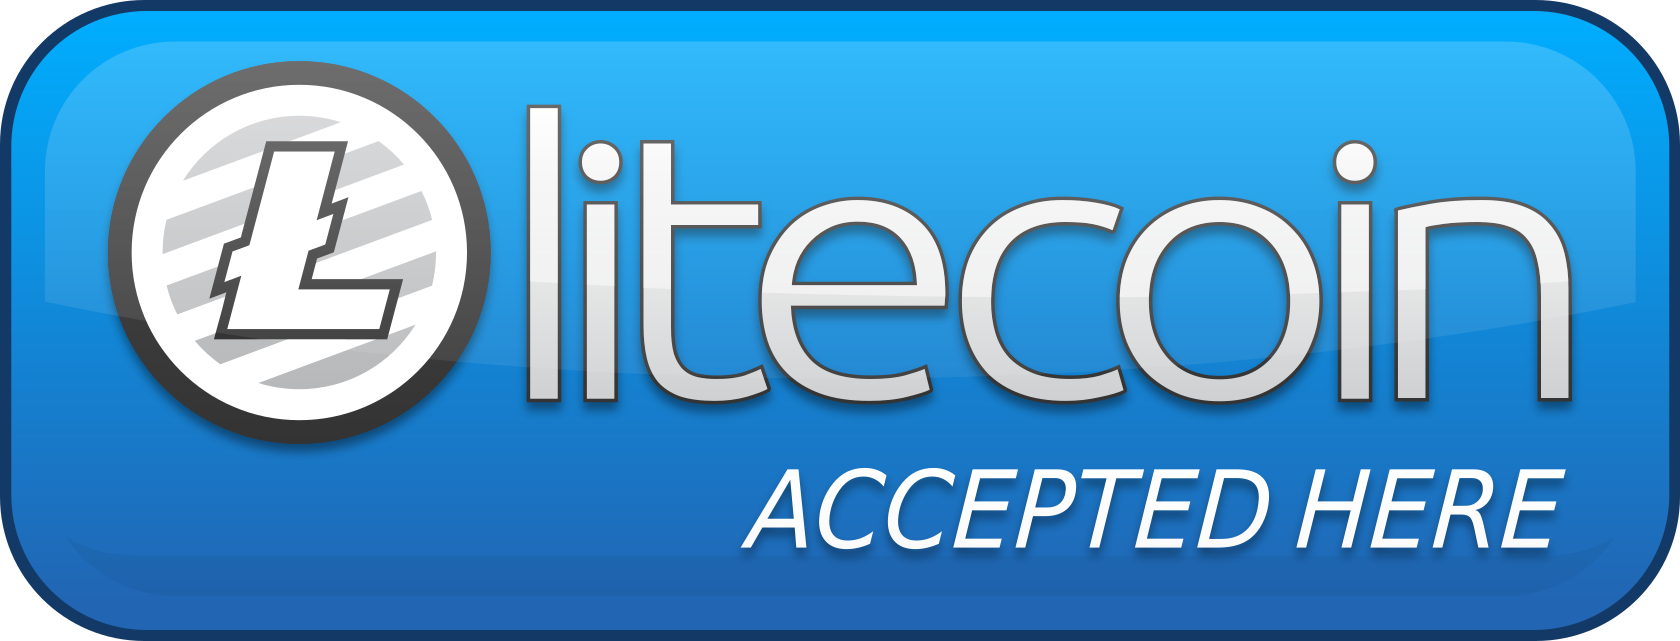 litecoin-accepted-here-05[1]_0.png